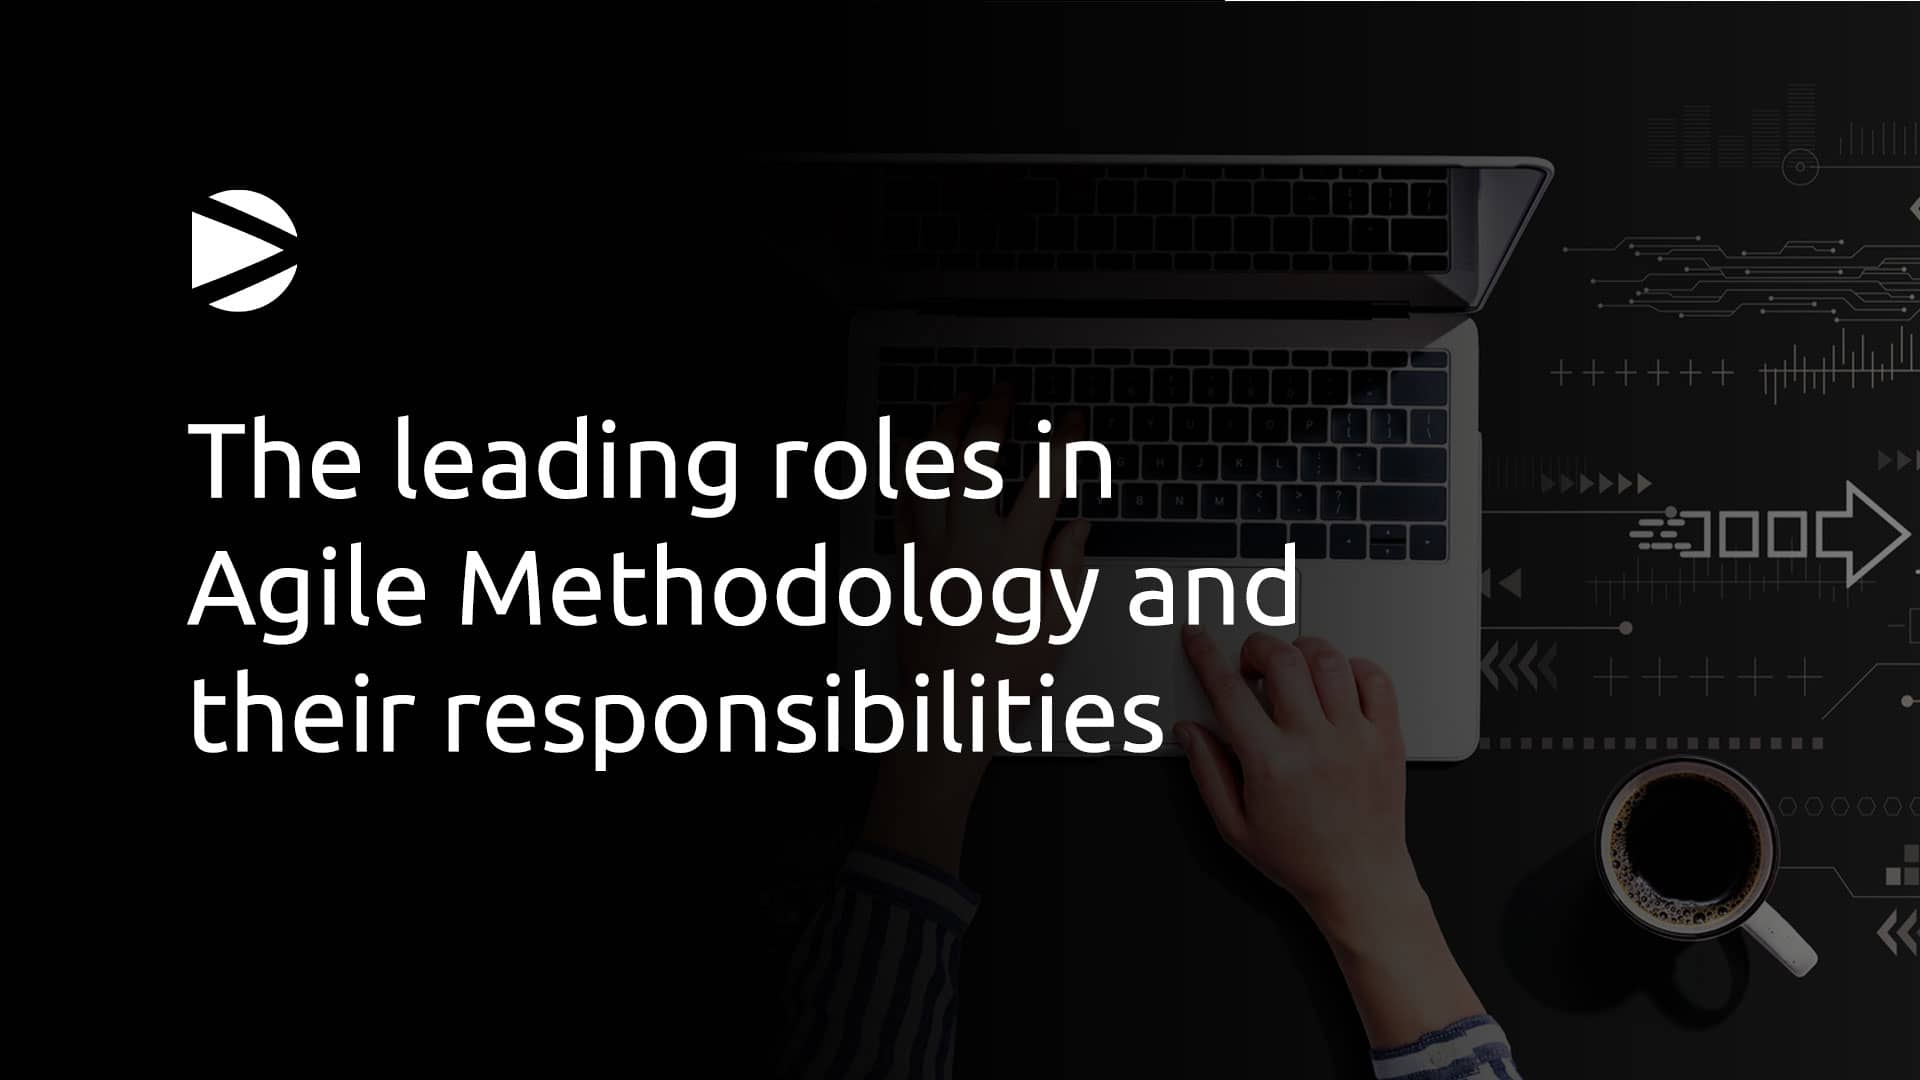 The leading roles in Agile Methodology and their responsibilities